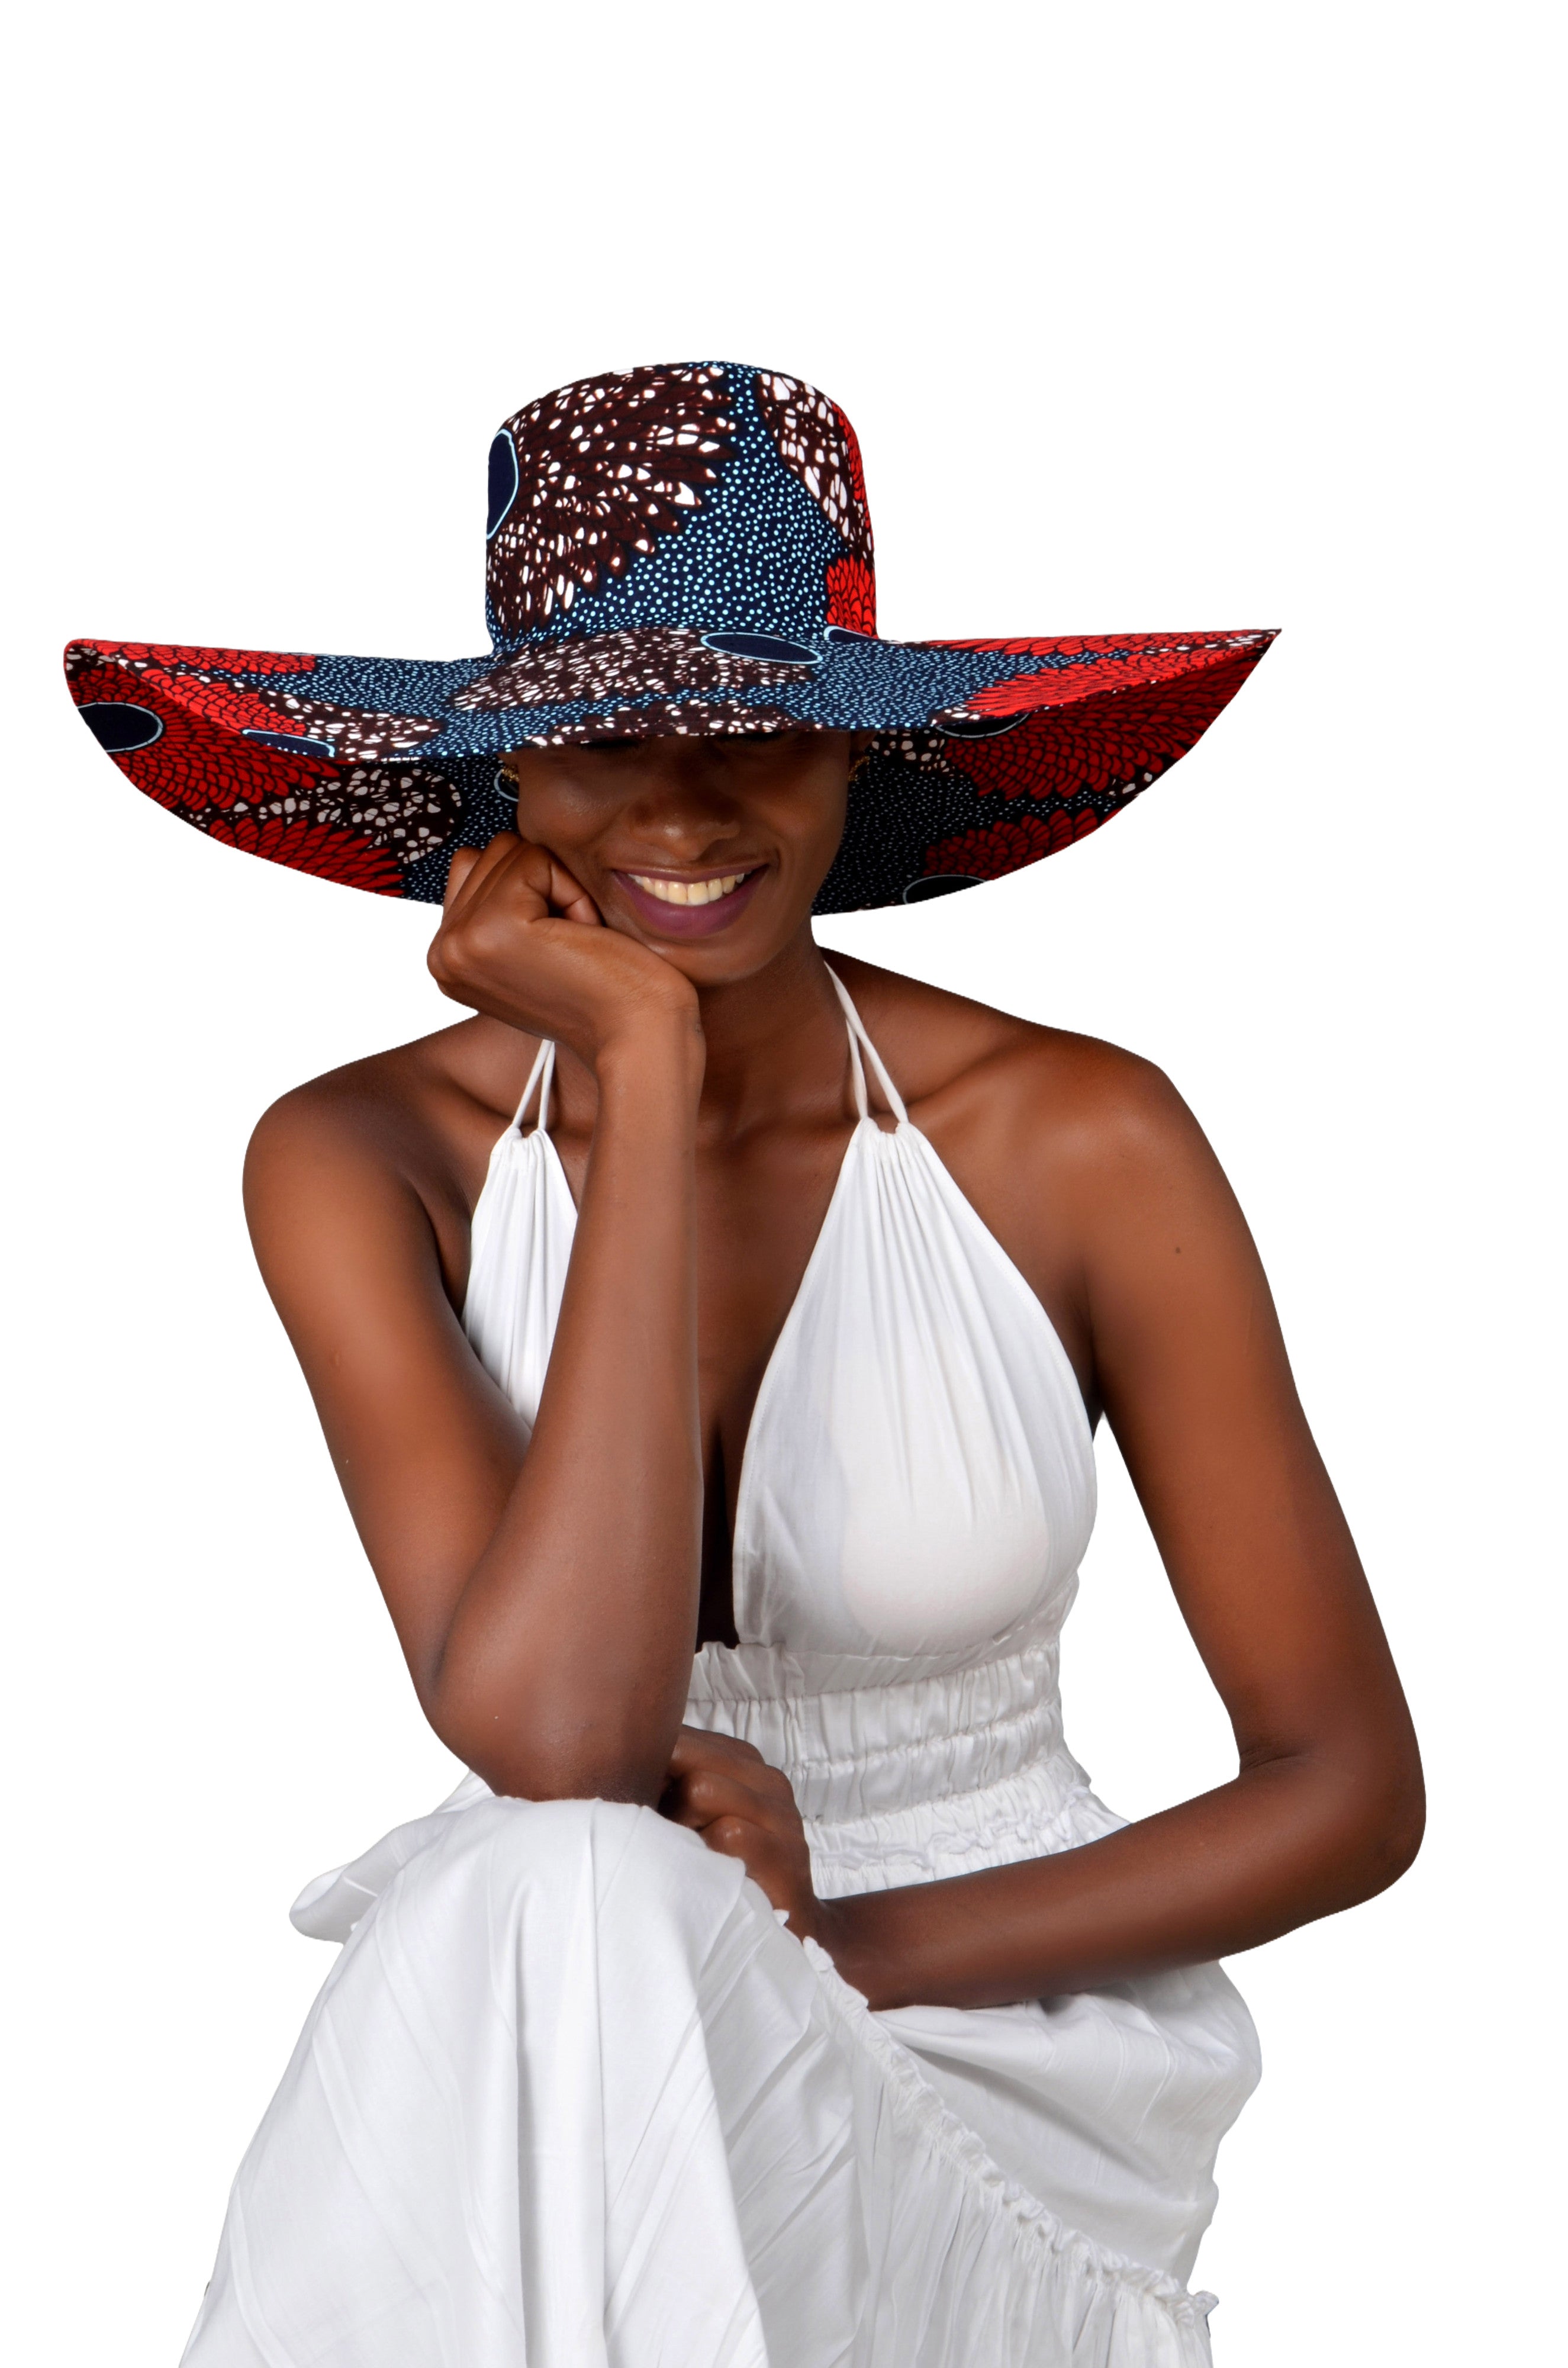 Jollo Nungu Modern African Hat: let comfort and style give you a best shade